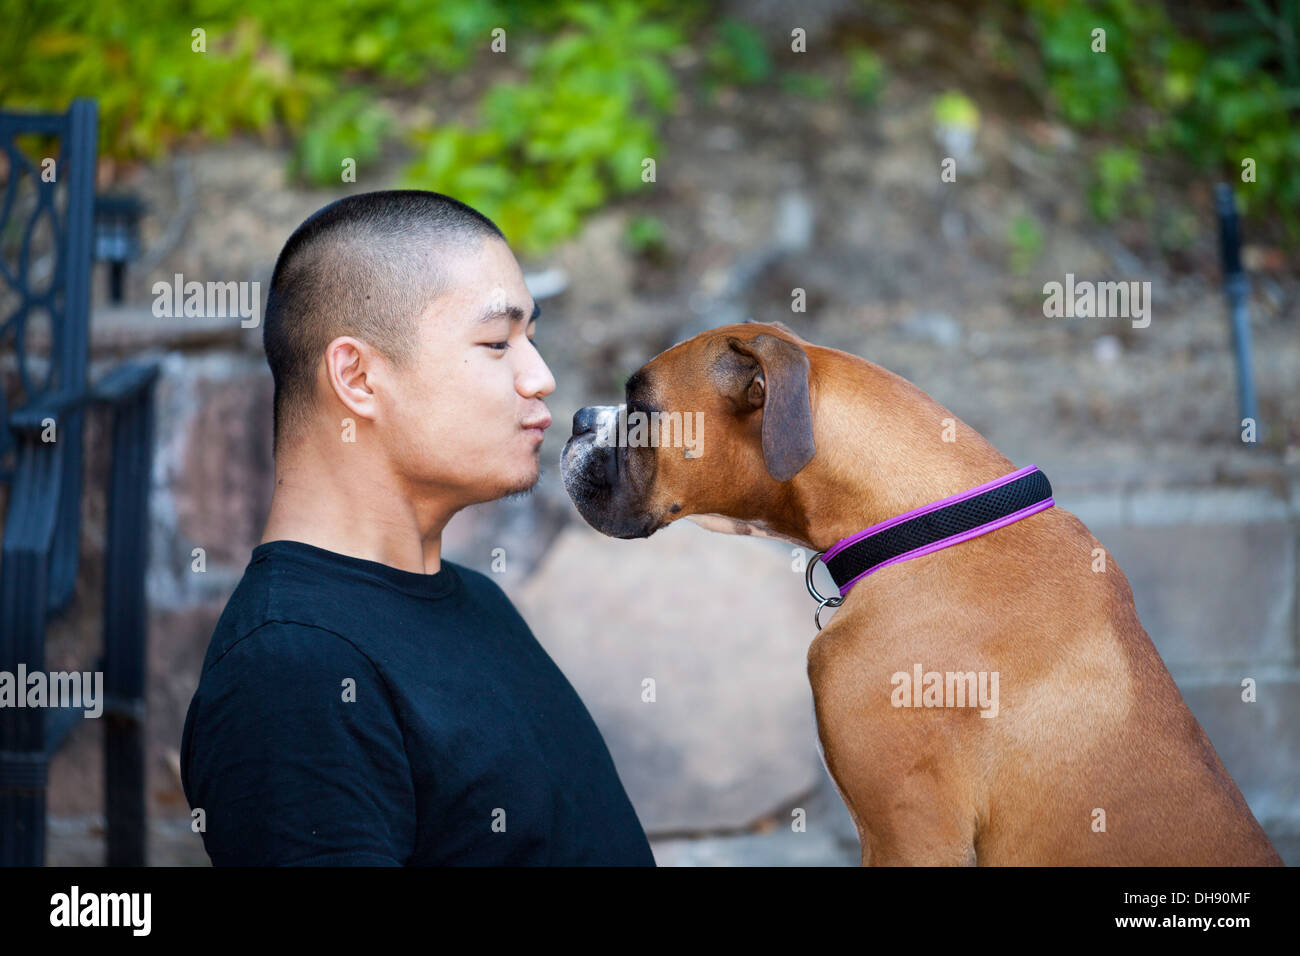 Young Asian man playing with his Boxer dog, Novato, Marin County, California, USA, North America. Stock Photo